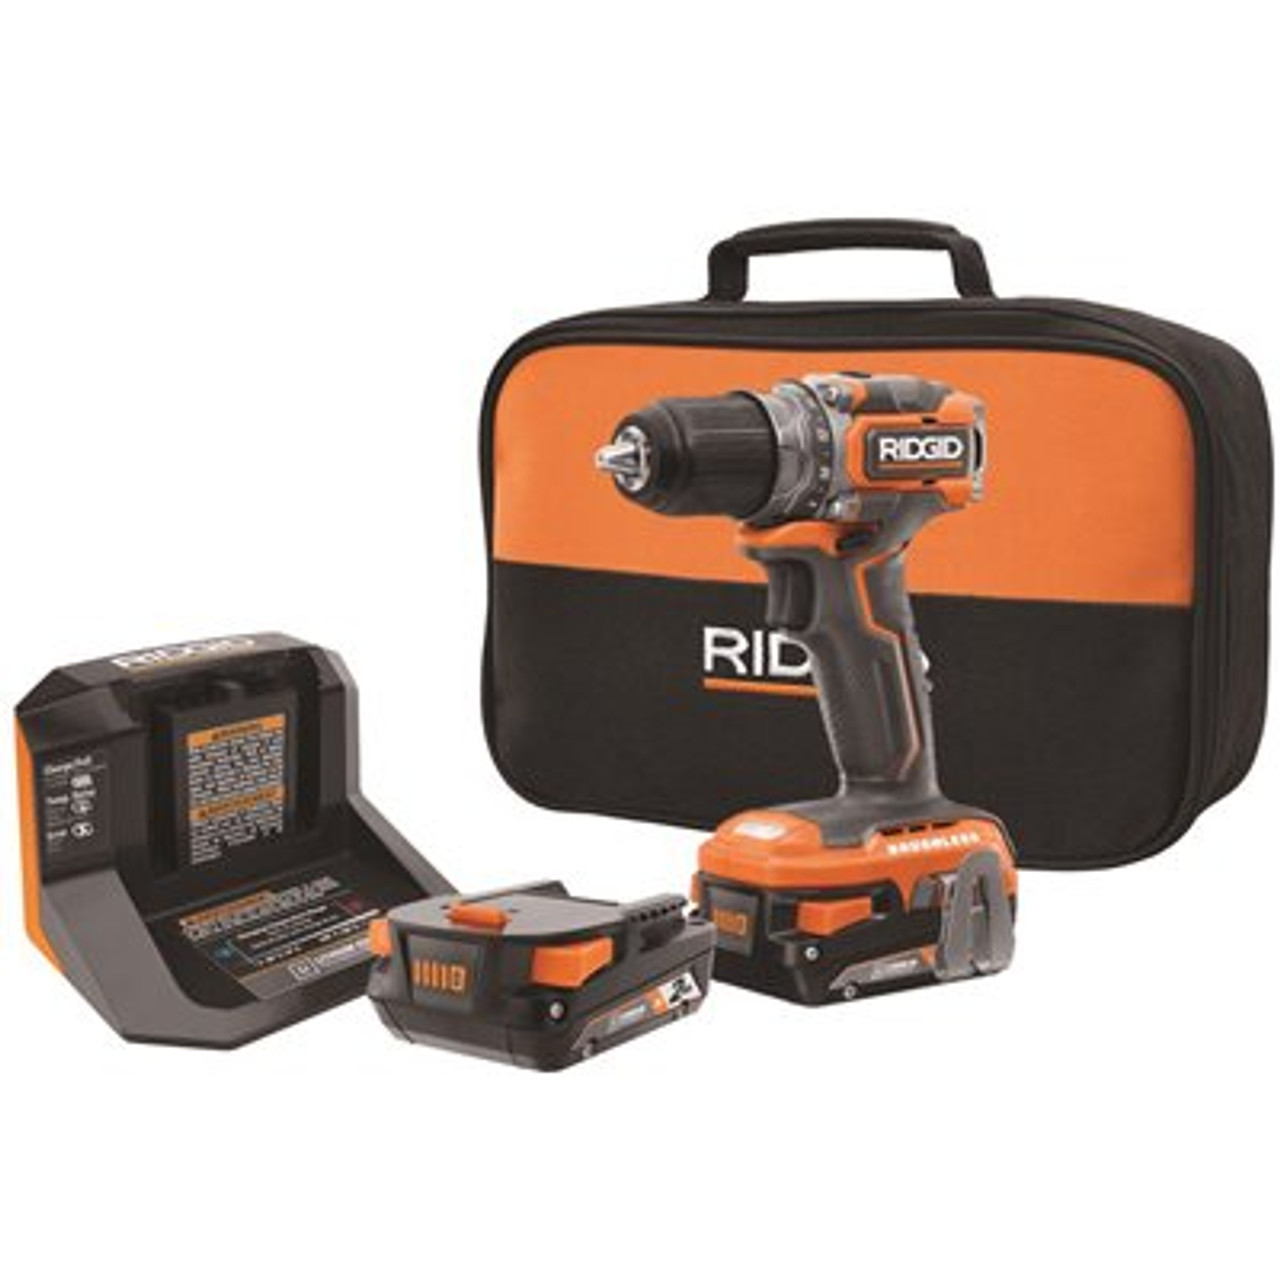 Ridgid 18V Brushless Subcompact Cordless 1/2 In. Drill Driver Kit With (2) 2.0 Ah Battery, Charger And Bag